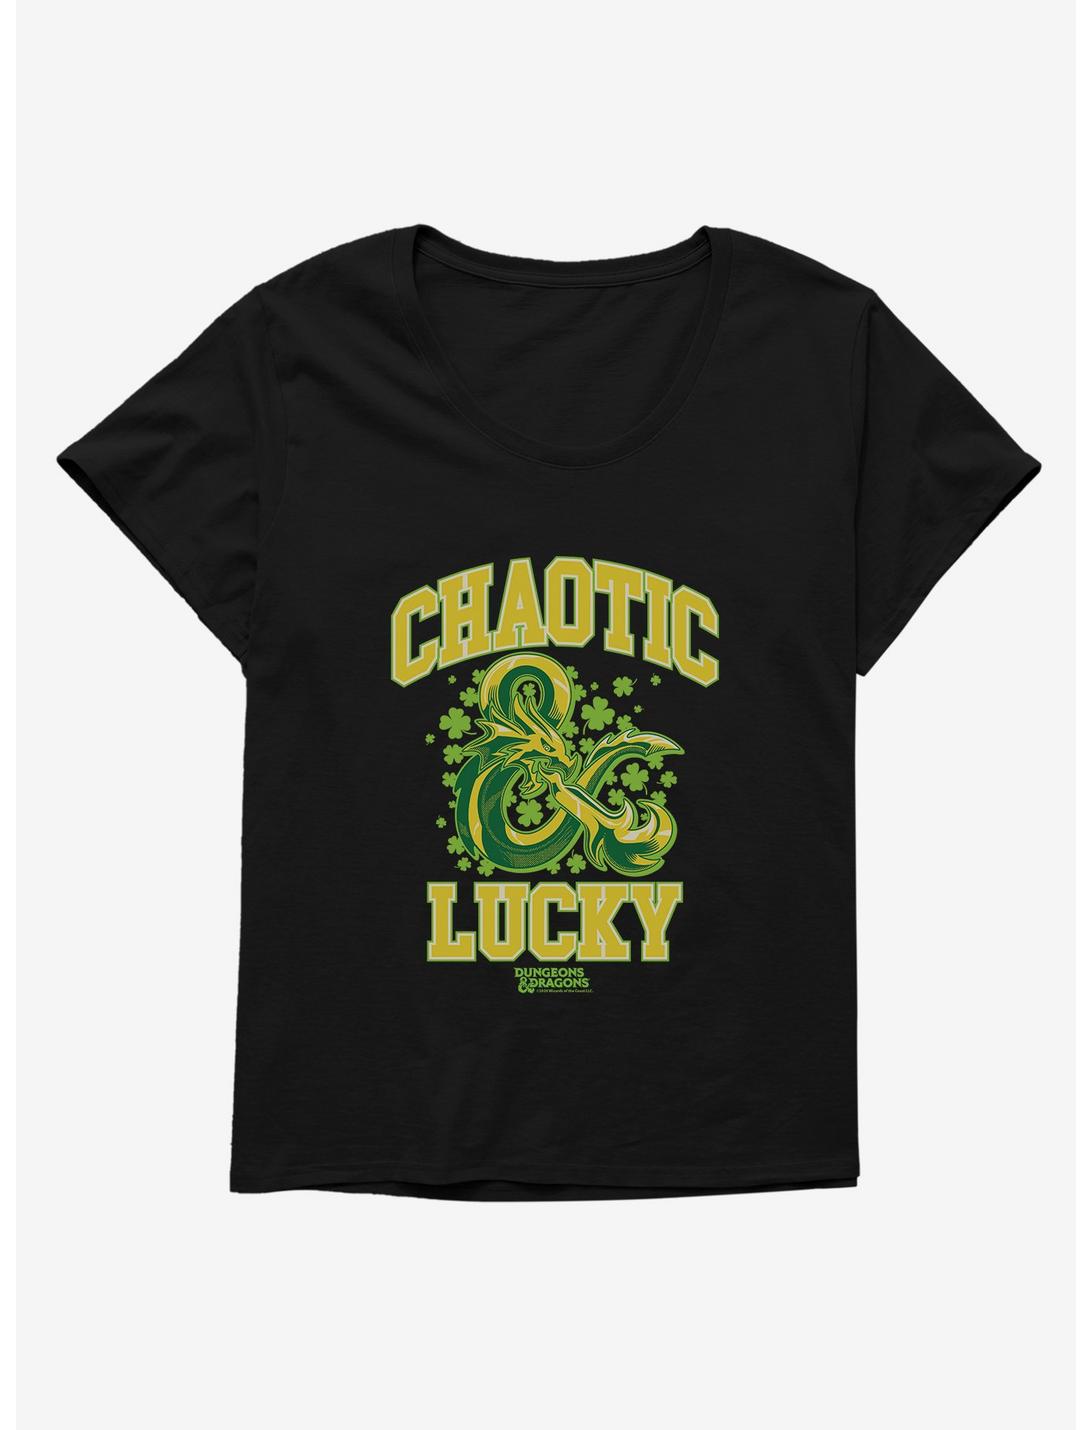 Dungeons & Dragons Chaotic And Lucky Womens T-Shirt Plus Size, BLACK, hi-res